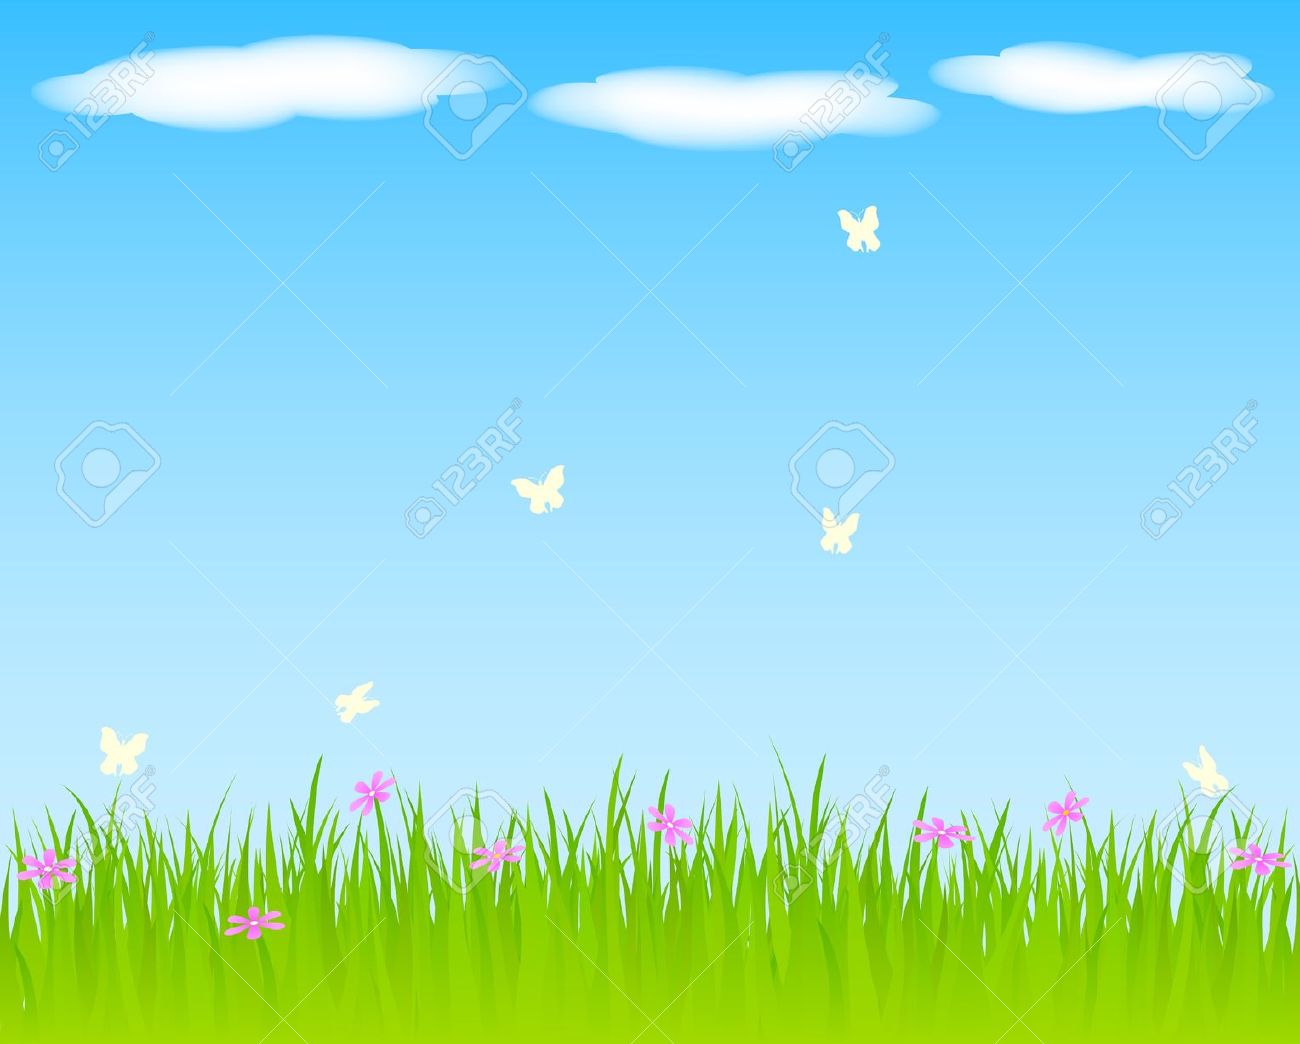 Sky and grass background clipart